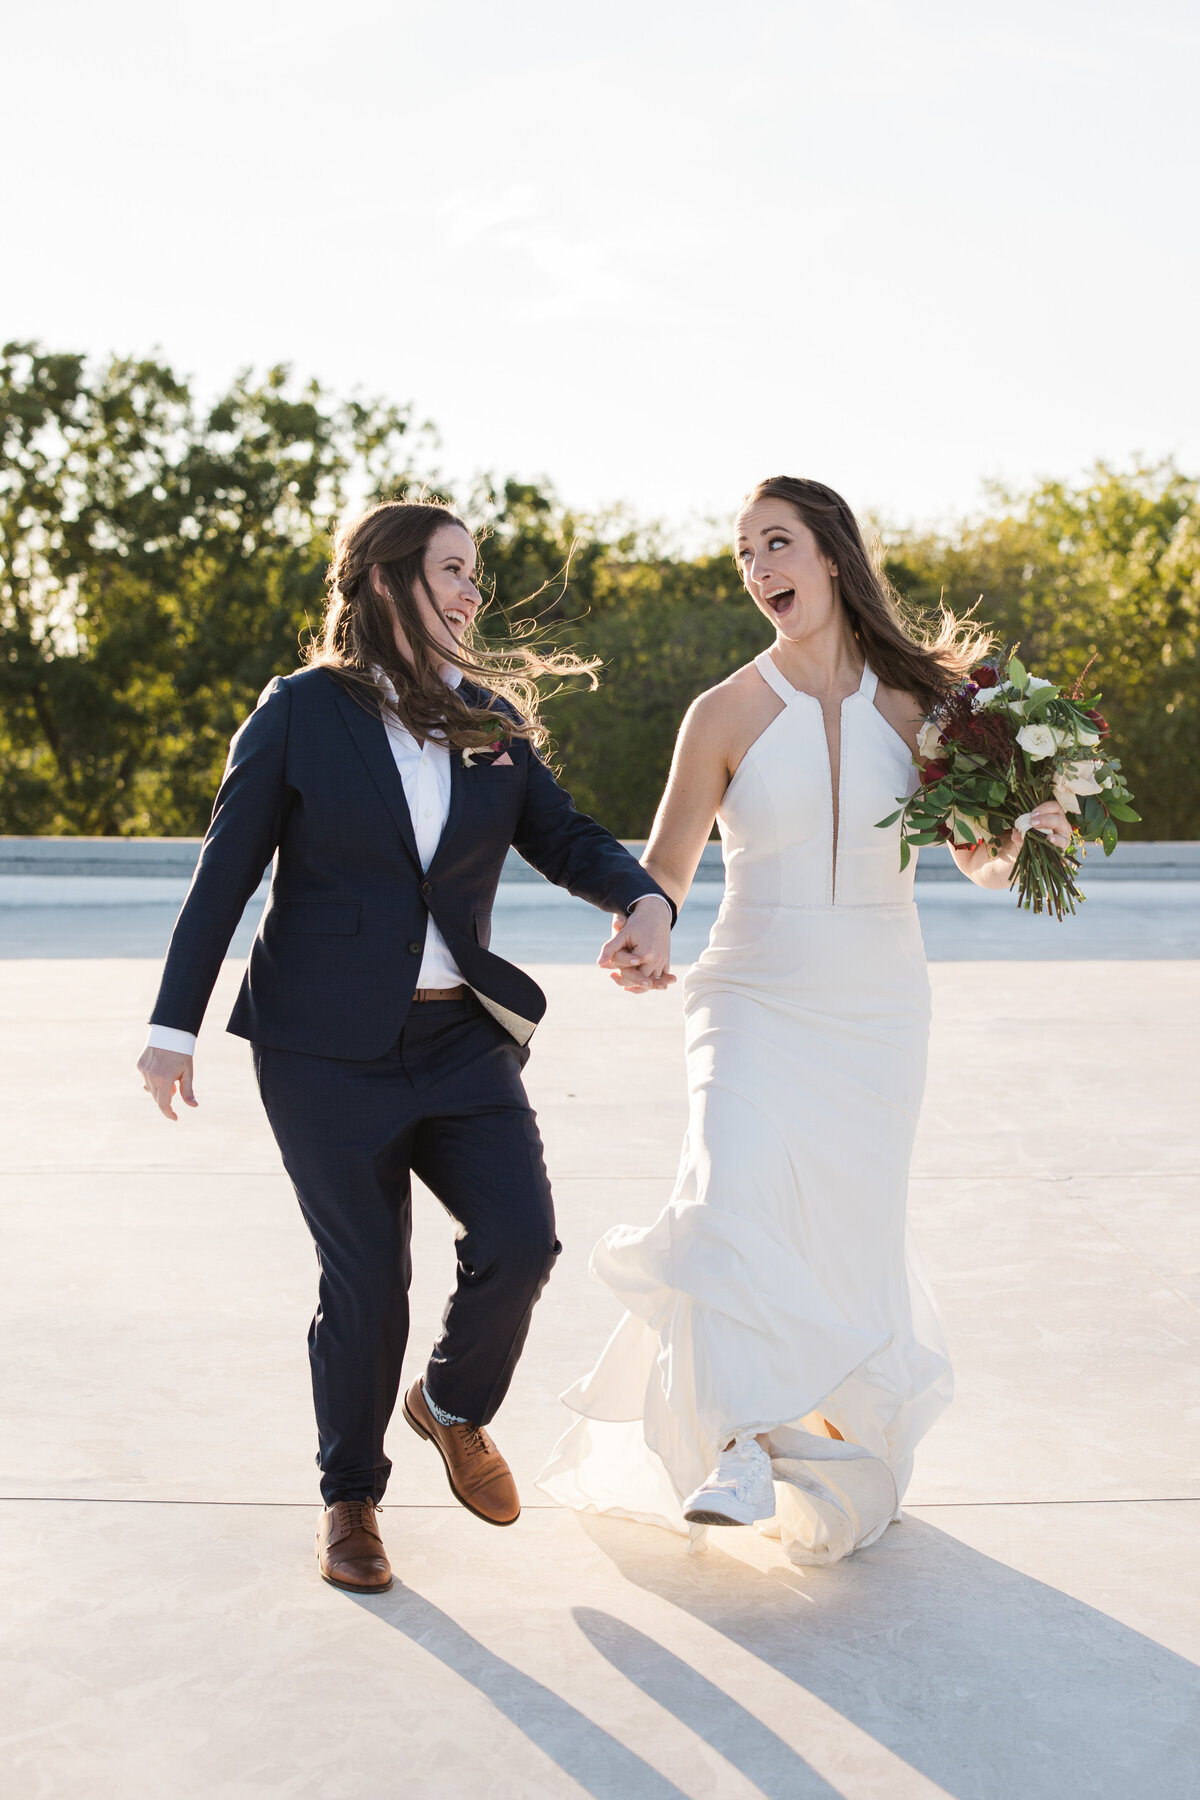 Two brides playfully walking and laughing on the roof of their venue after their wedding ceremony at the BRIK Venue in Fort Worth, Texas. The bride on the right is wearing a sleeveless, elegant, white dress and is holding a bouquet. The bride on the left is wearing a navy suit with a boutonniere.